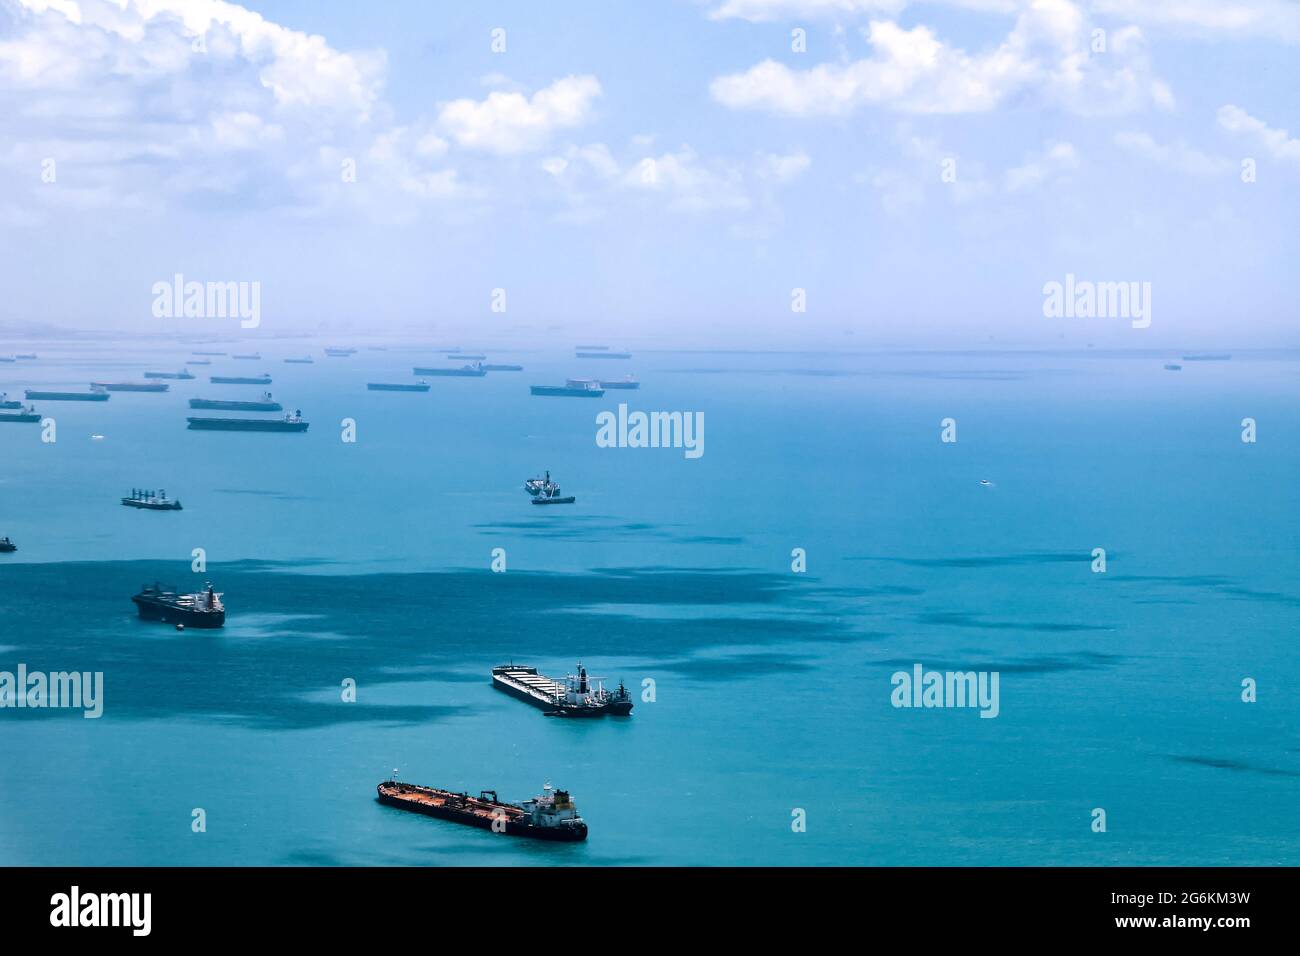 Aerial view of container ships in Singapore Strait. Airplane shot. Cargo ships anchored in the road, waiting to enter the busiest port in region.  Stock Photo